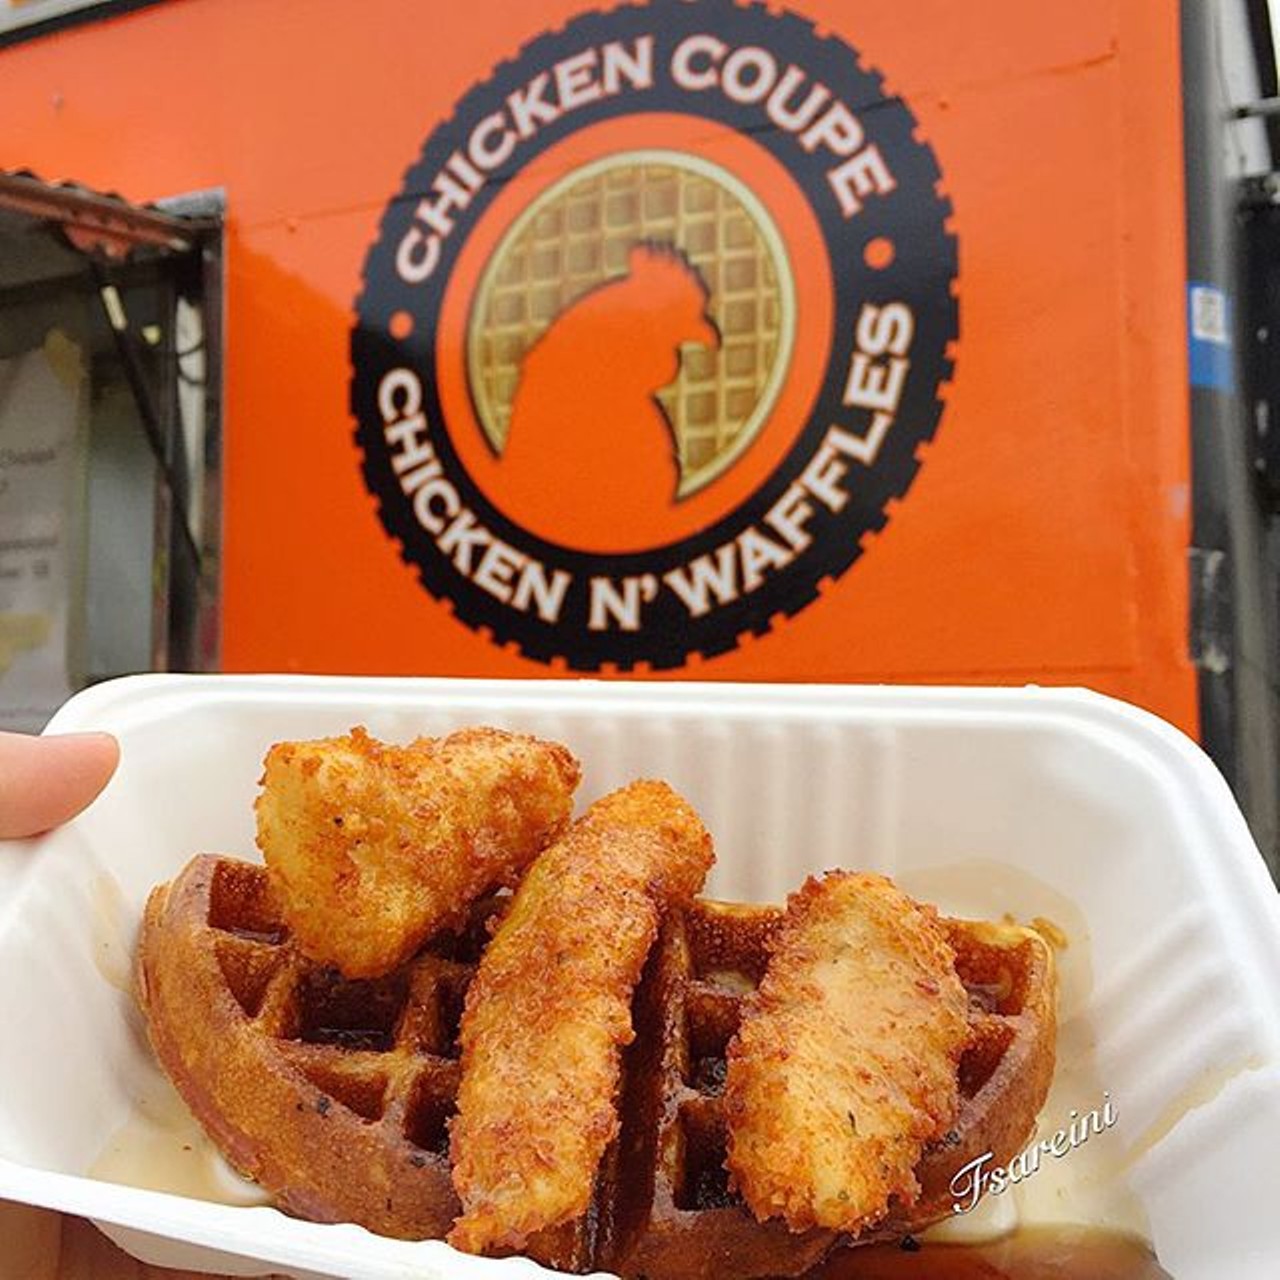 Chicken Coupe&nbsp;
Nothing is better than chicken and waffles. The chicken coupe serves up mouth watering fried chicken with puffy belgian waffles. They even have fried chicken in a waffle cone!
Photo via Instagram user @fsareini